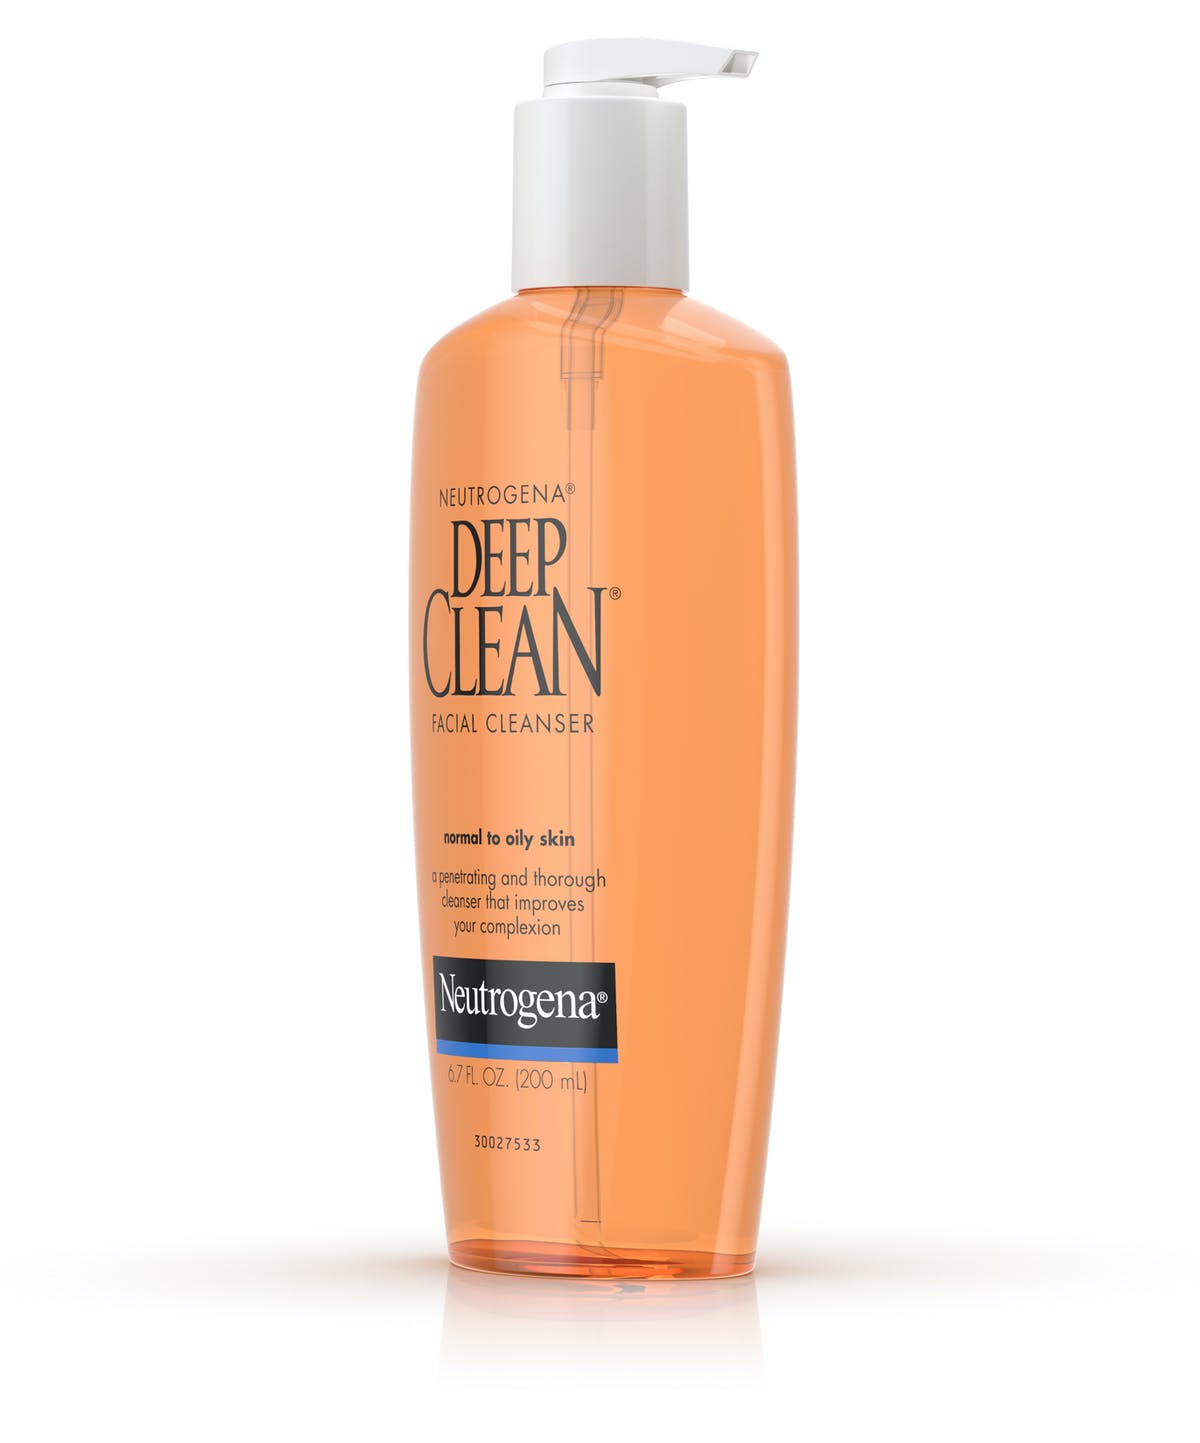 Neutrogena Deep Clean Facial Cleanser Best Face Wash For Oily Skin In Pakistan